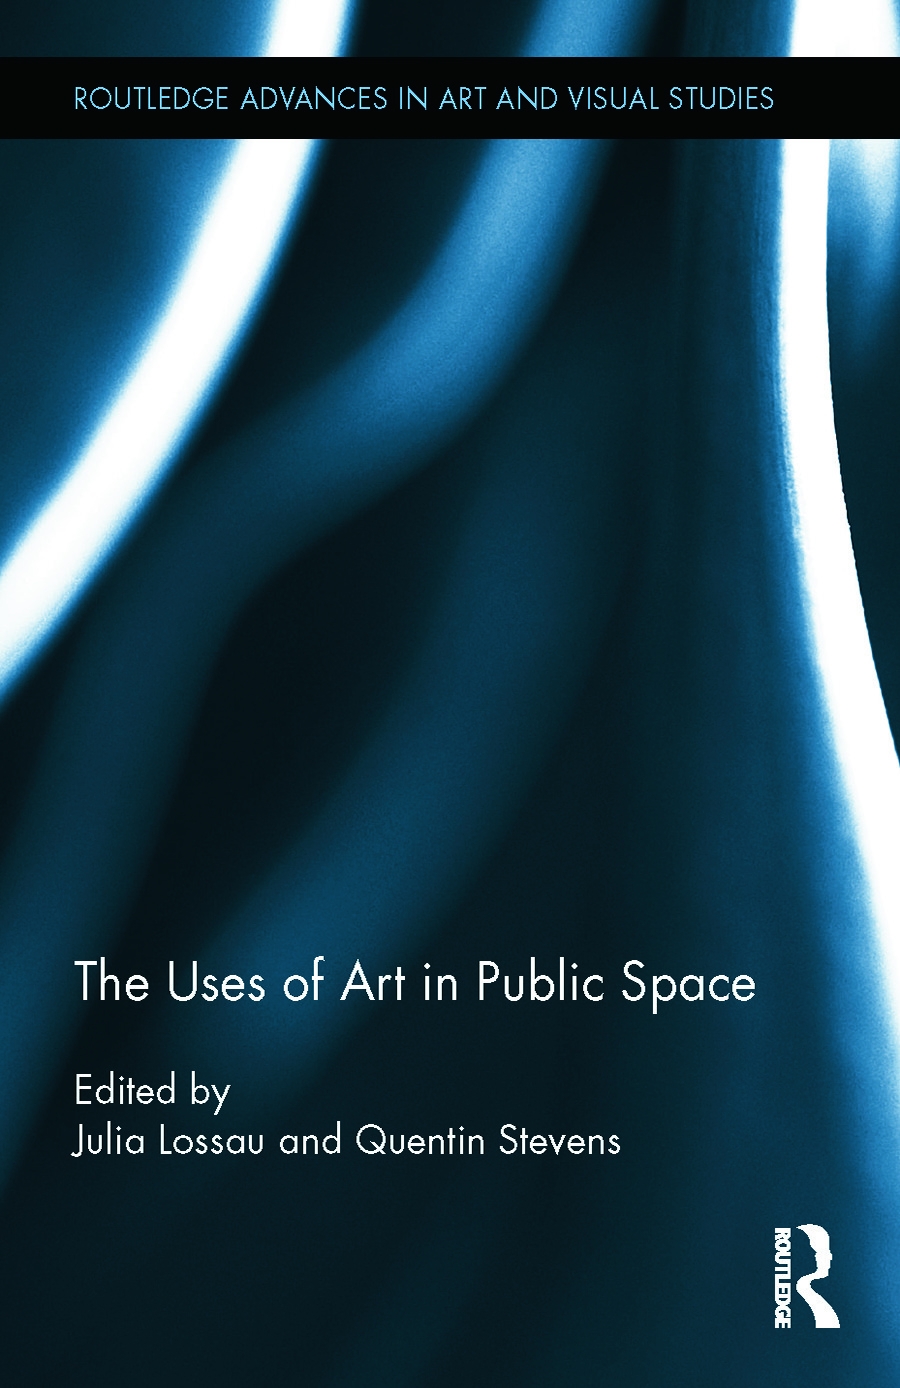 The Uses of Art in Public Space